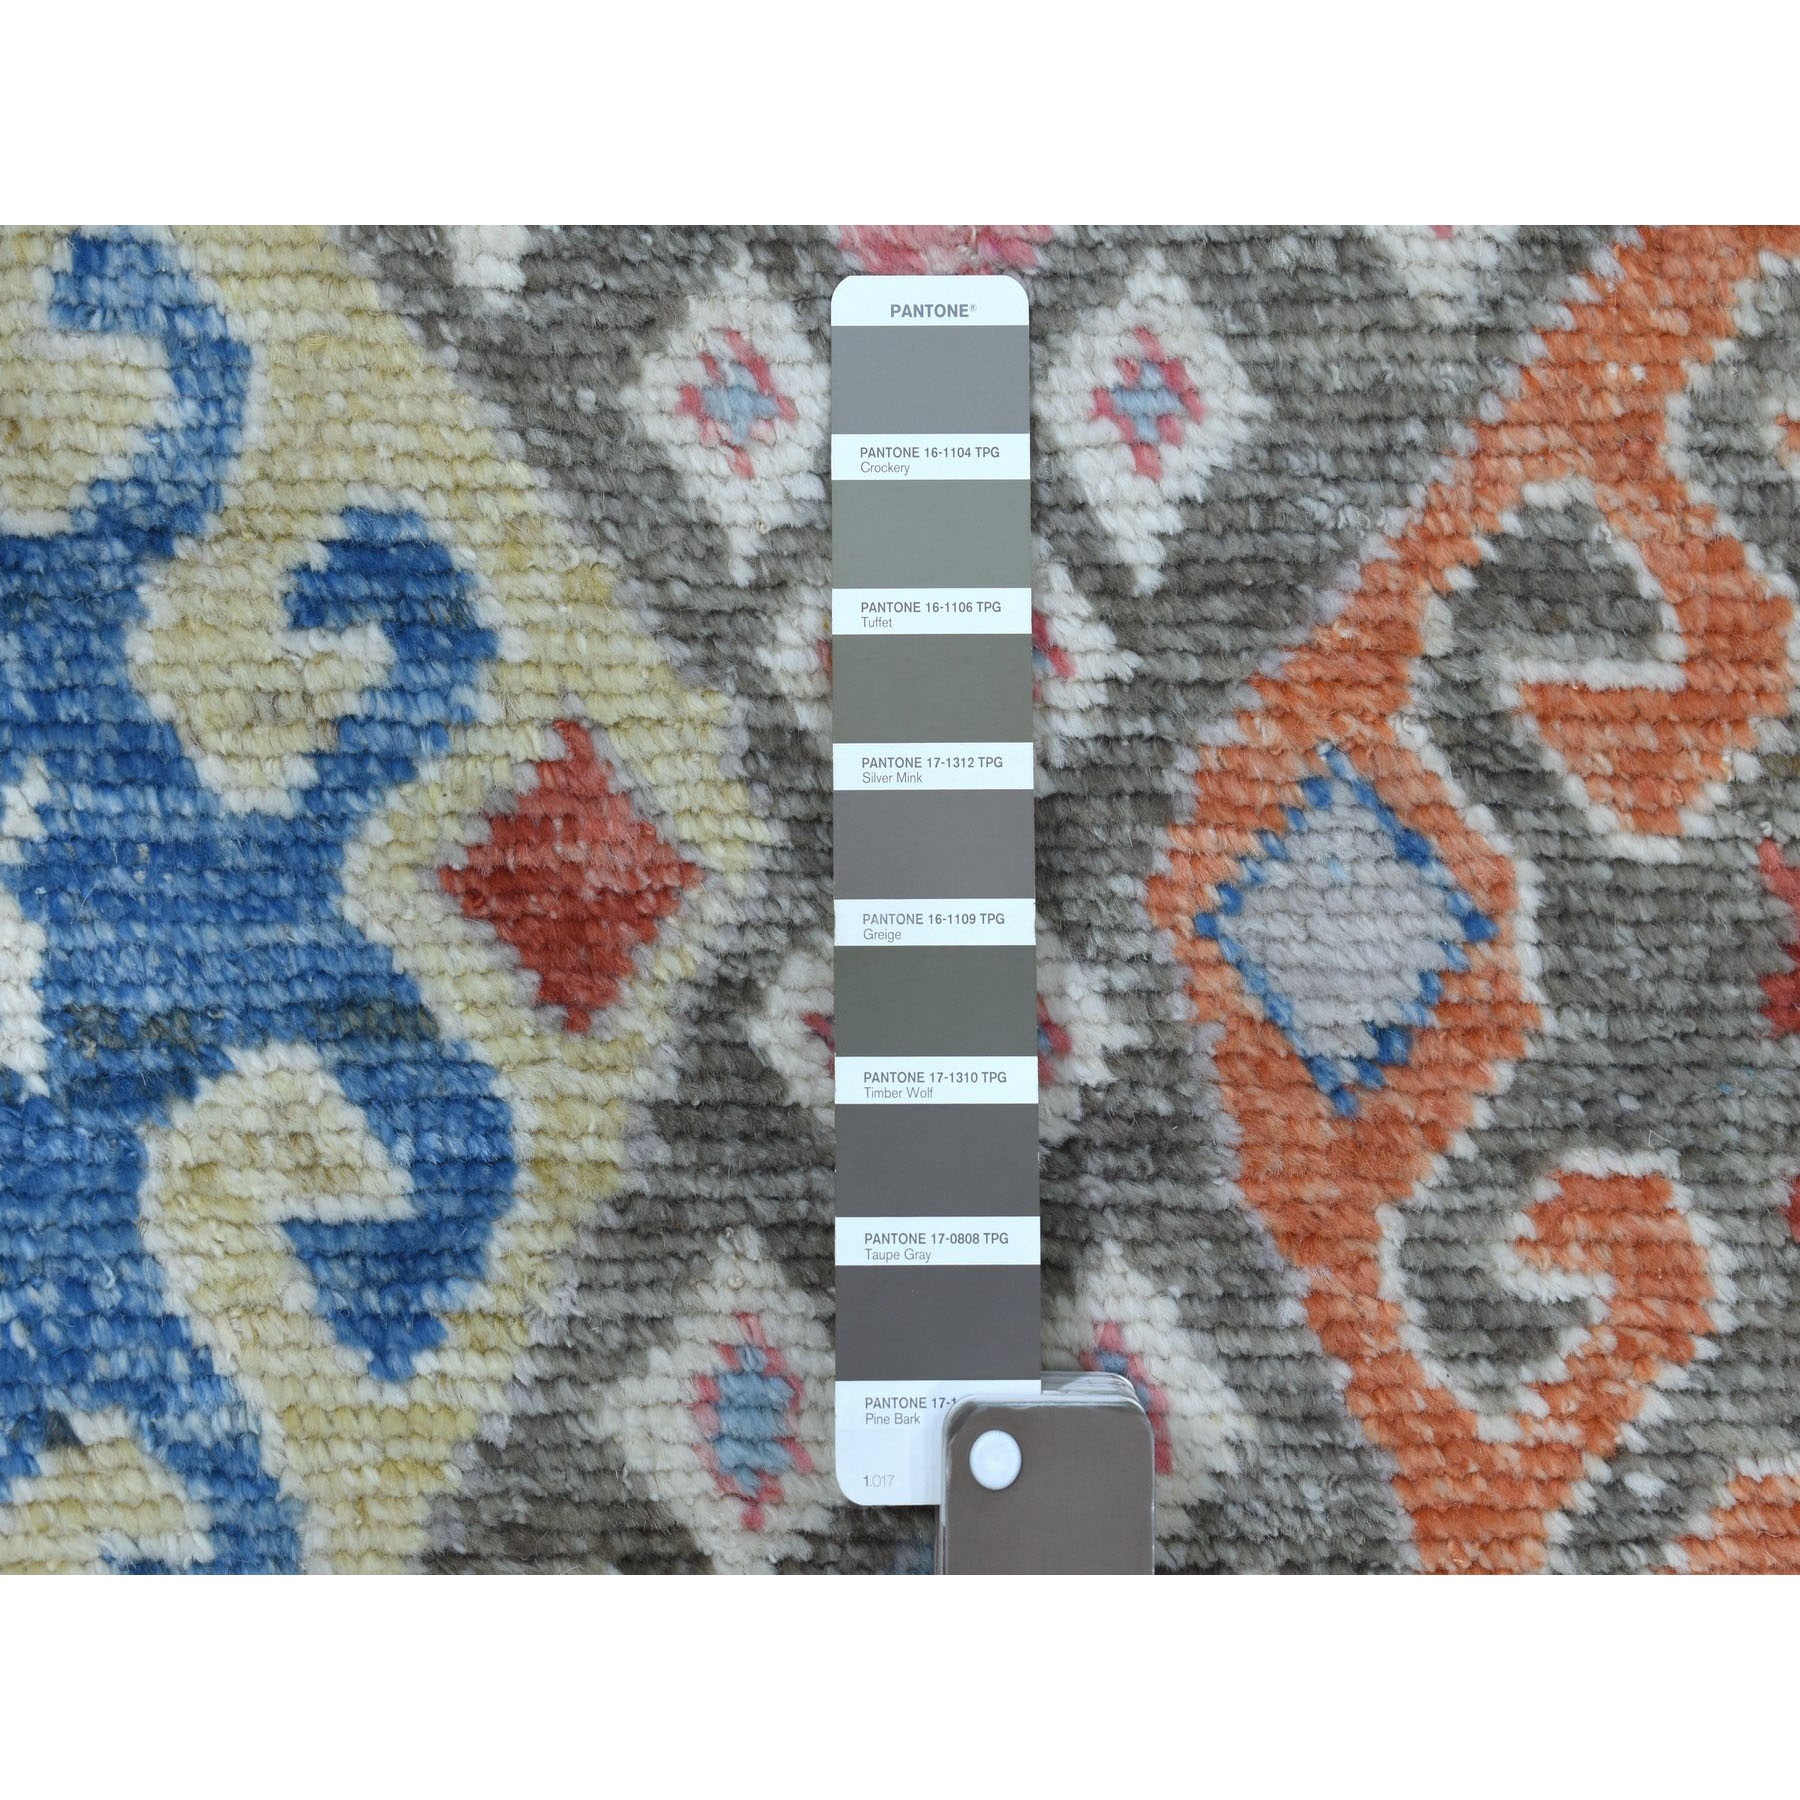 4'x11'8" Gray Extra Soft Wool Hand Woven Colorful Geometric Design Anatolian Village Inspired Oriental Runner Rug 